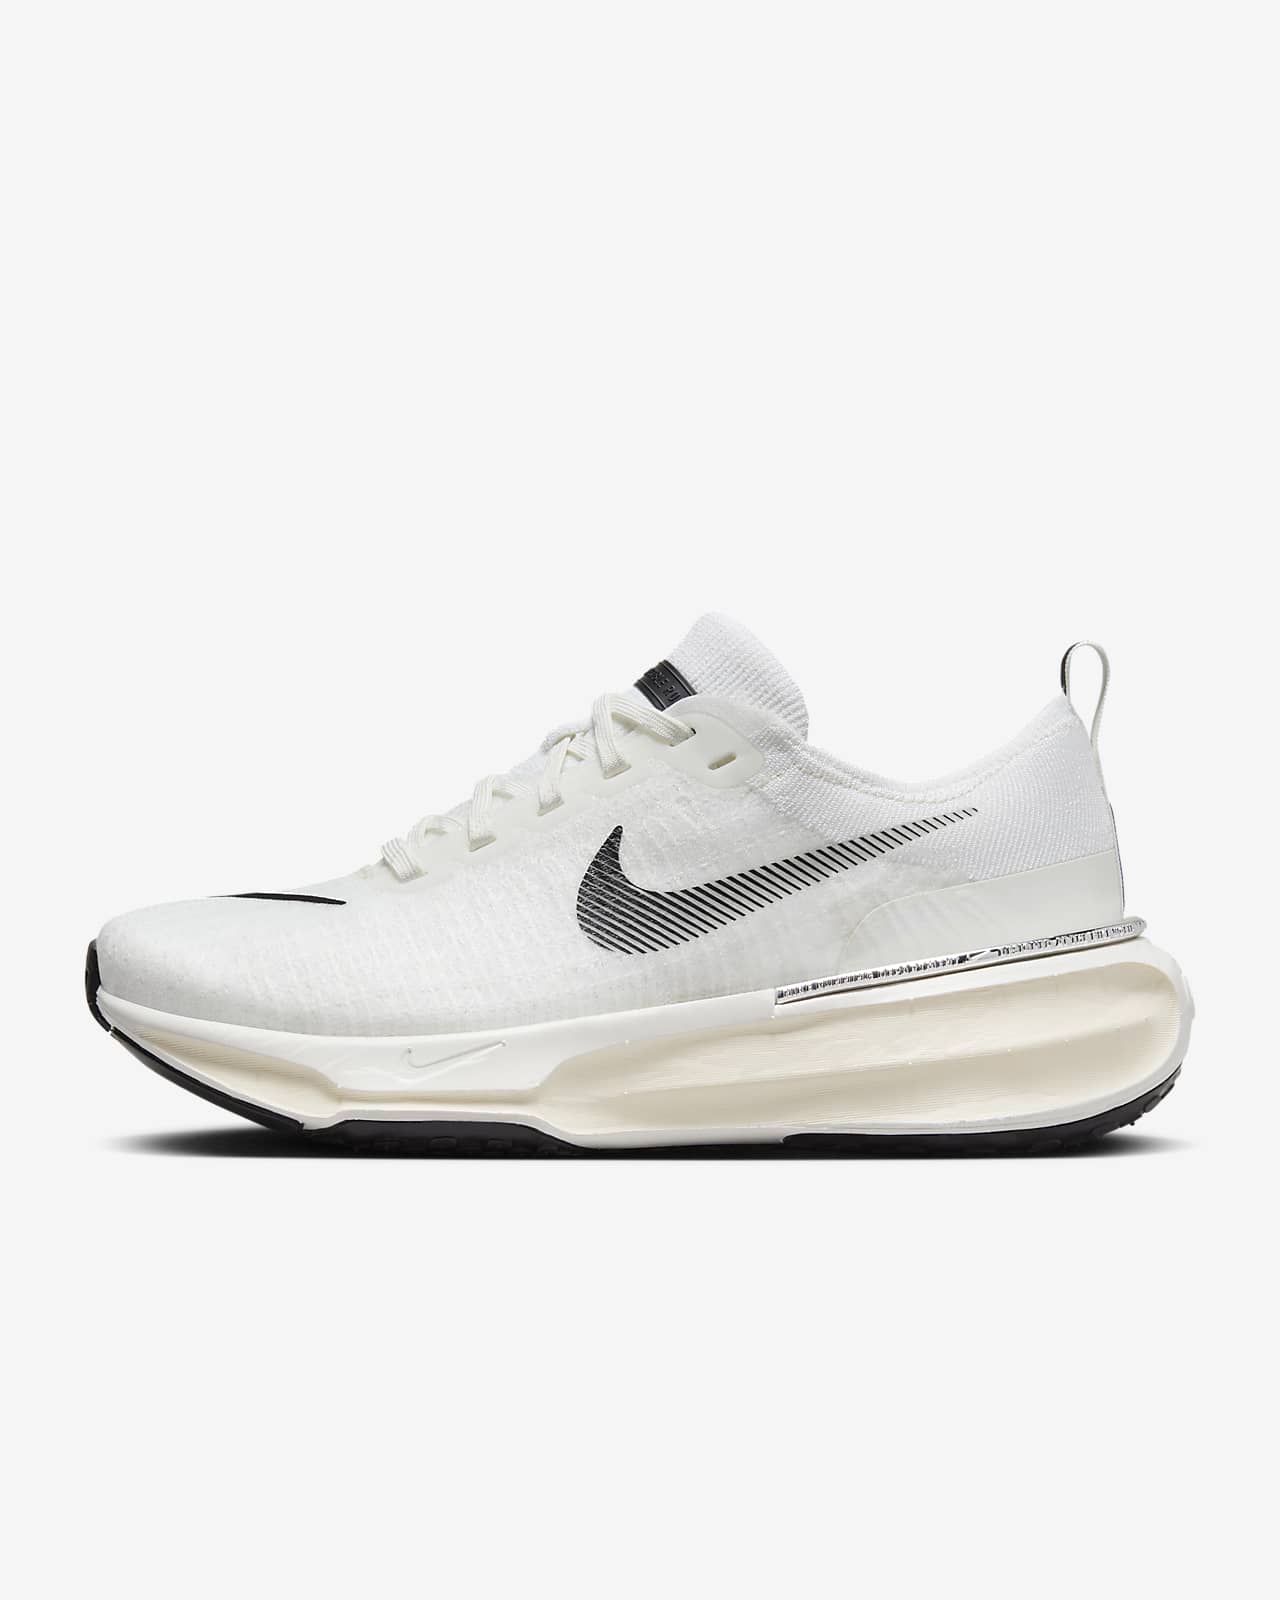 Nike Invincible 3 Women's Road Running Shoes (Extra Wide).